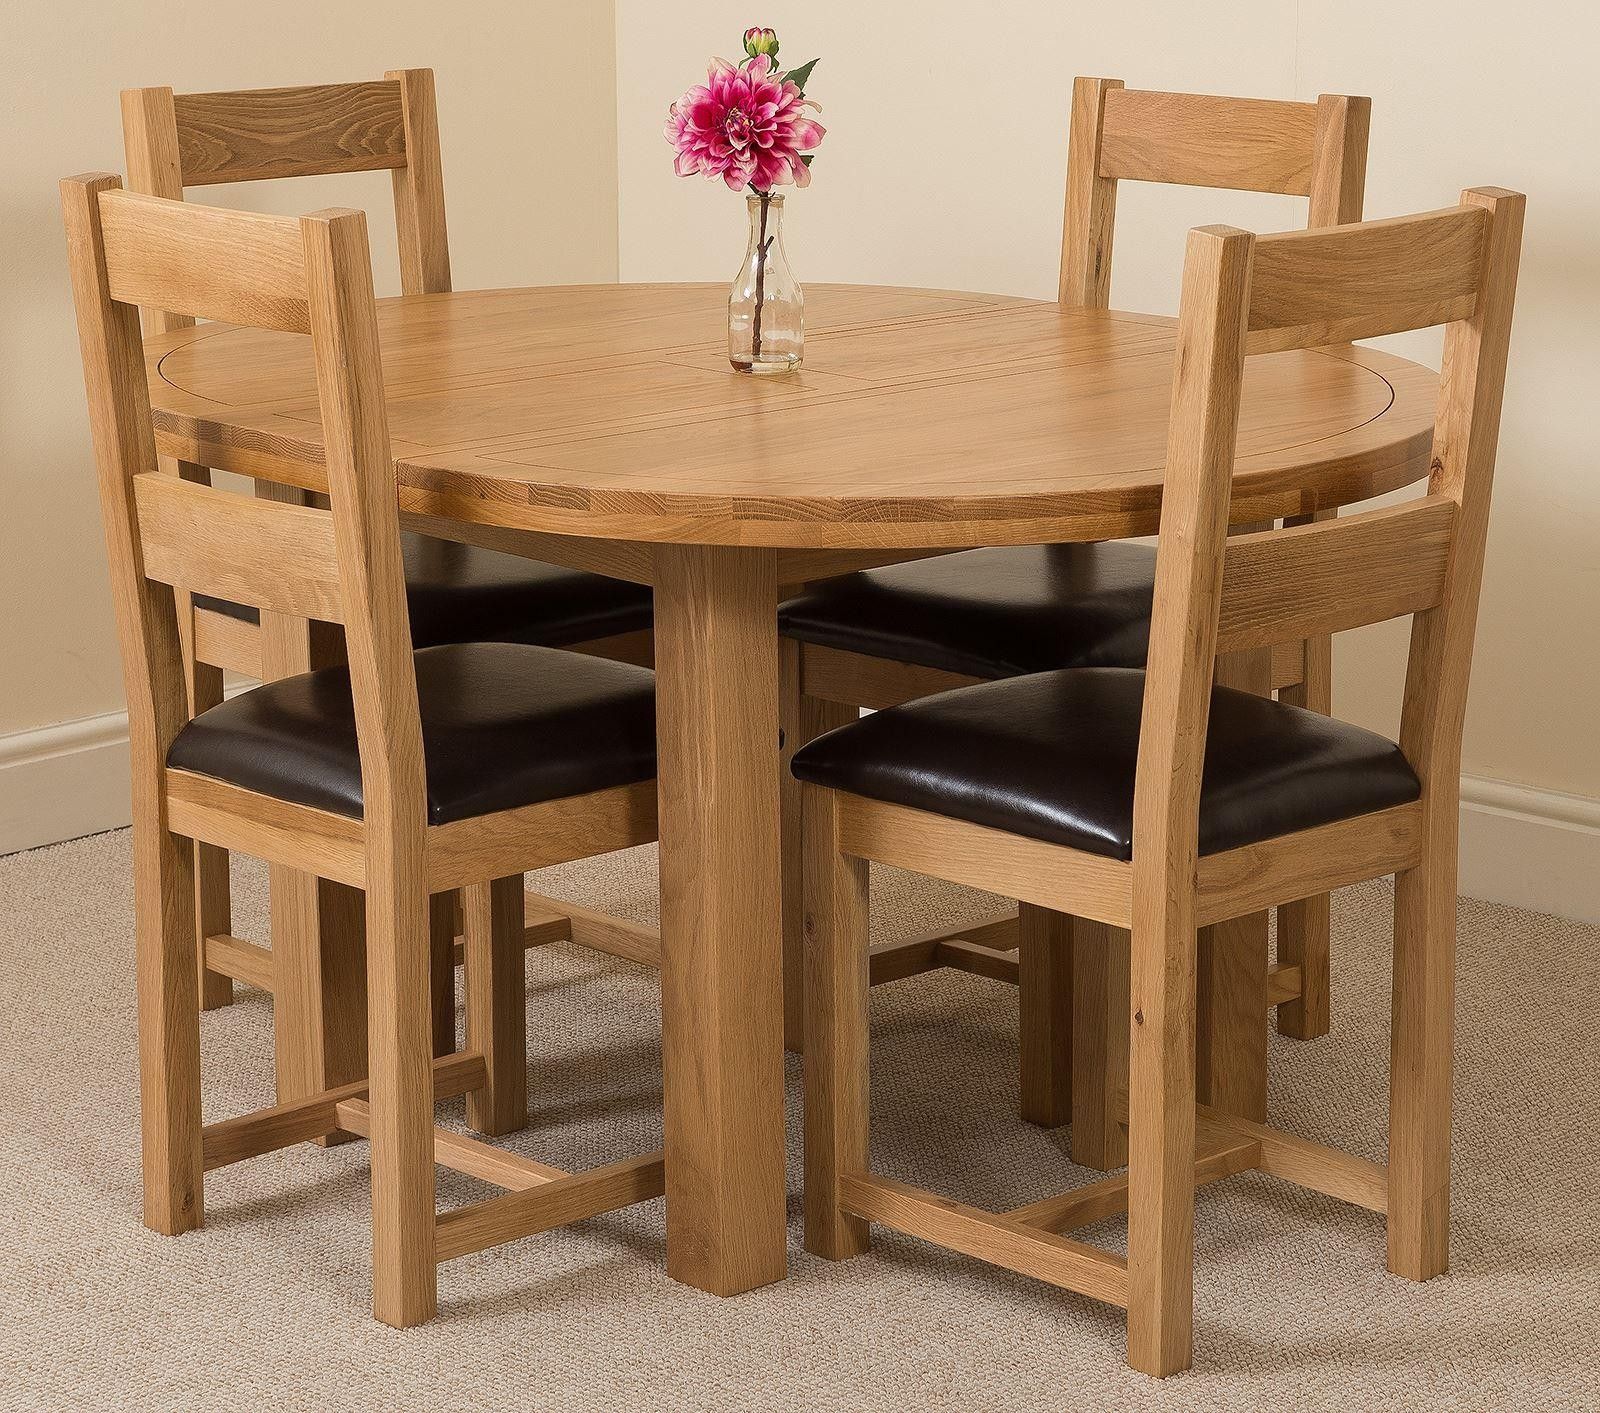 Edmonton Solid Oak Extending Oval Dining Table With 4 Lincoln Solid Oak Pertaining To Extendable Oval Patio Dining Sets (View 6 of 15)